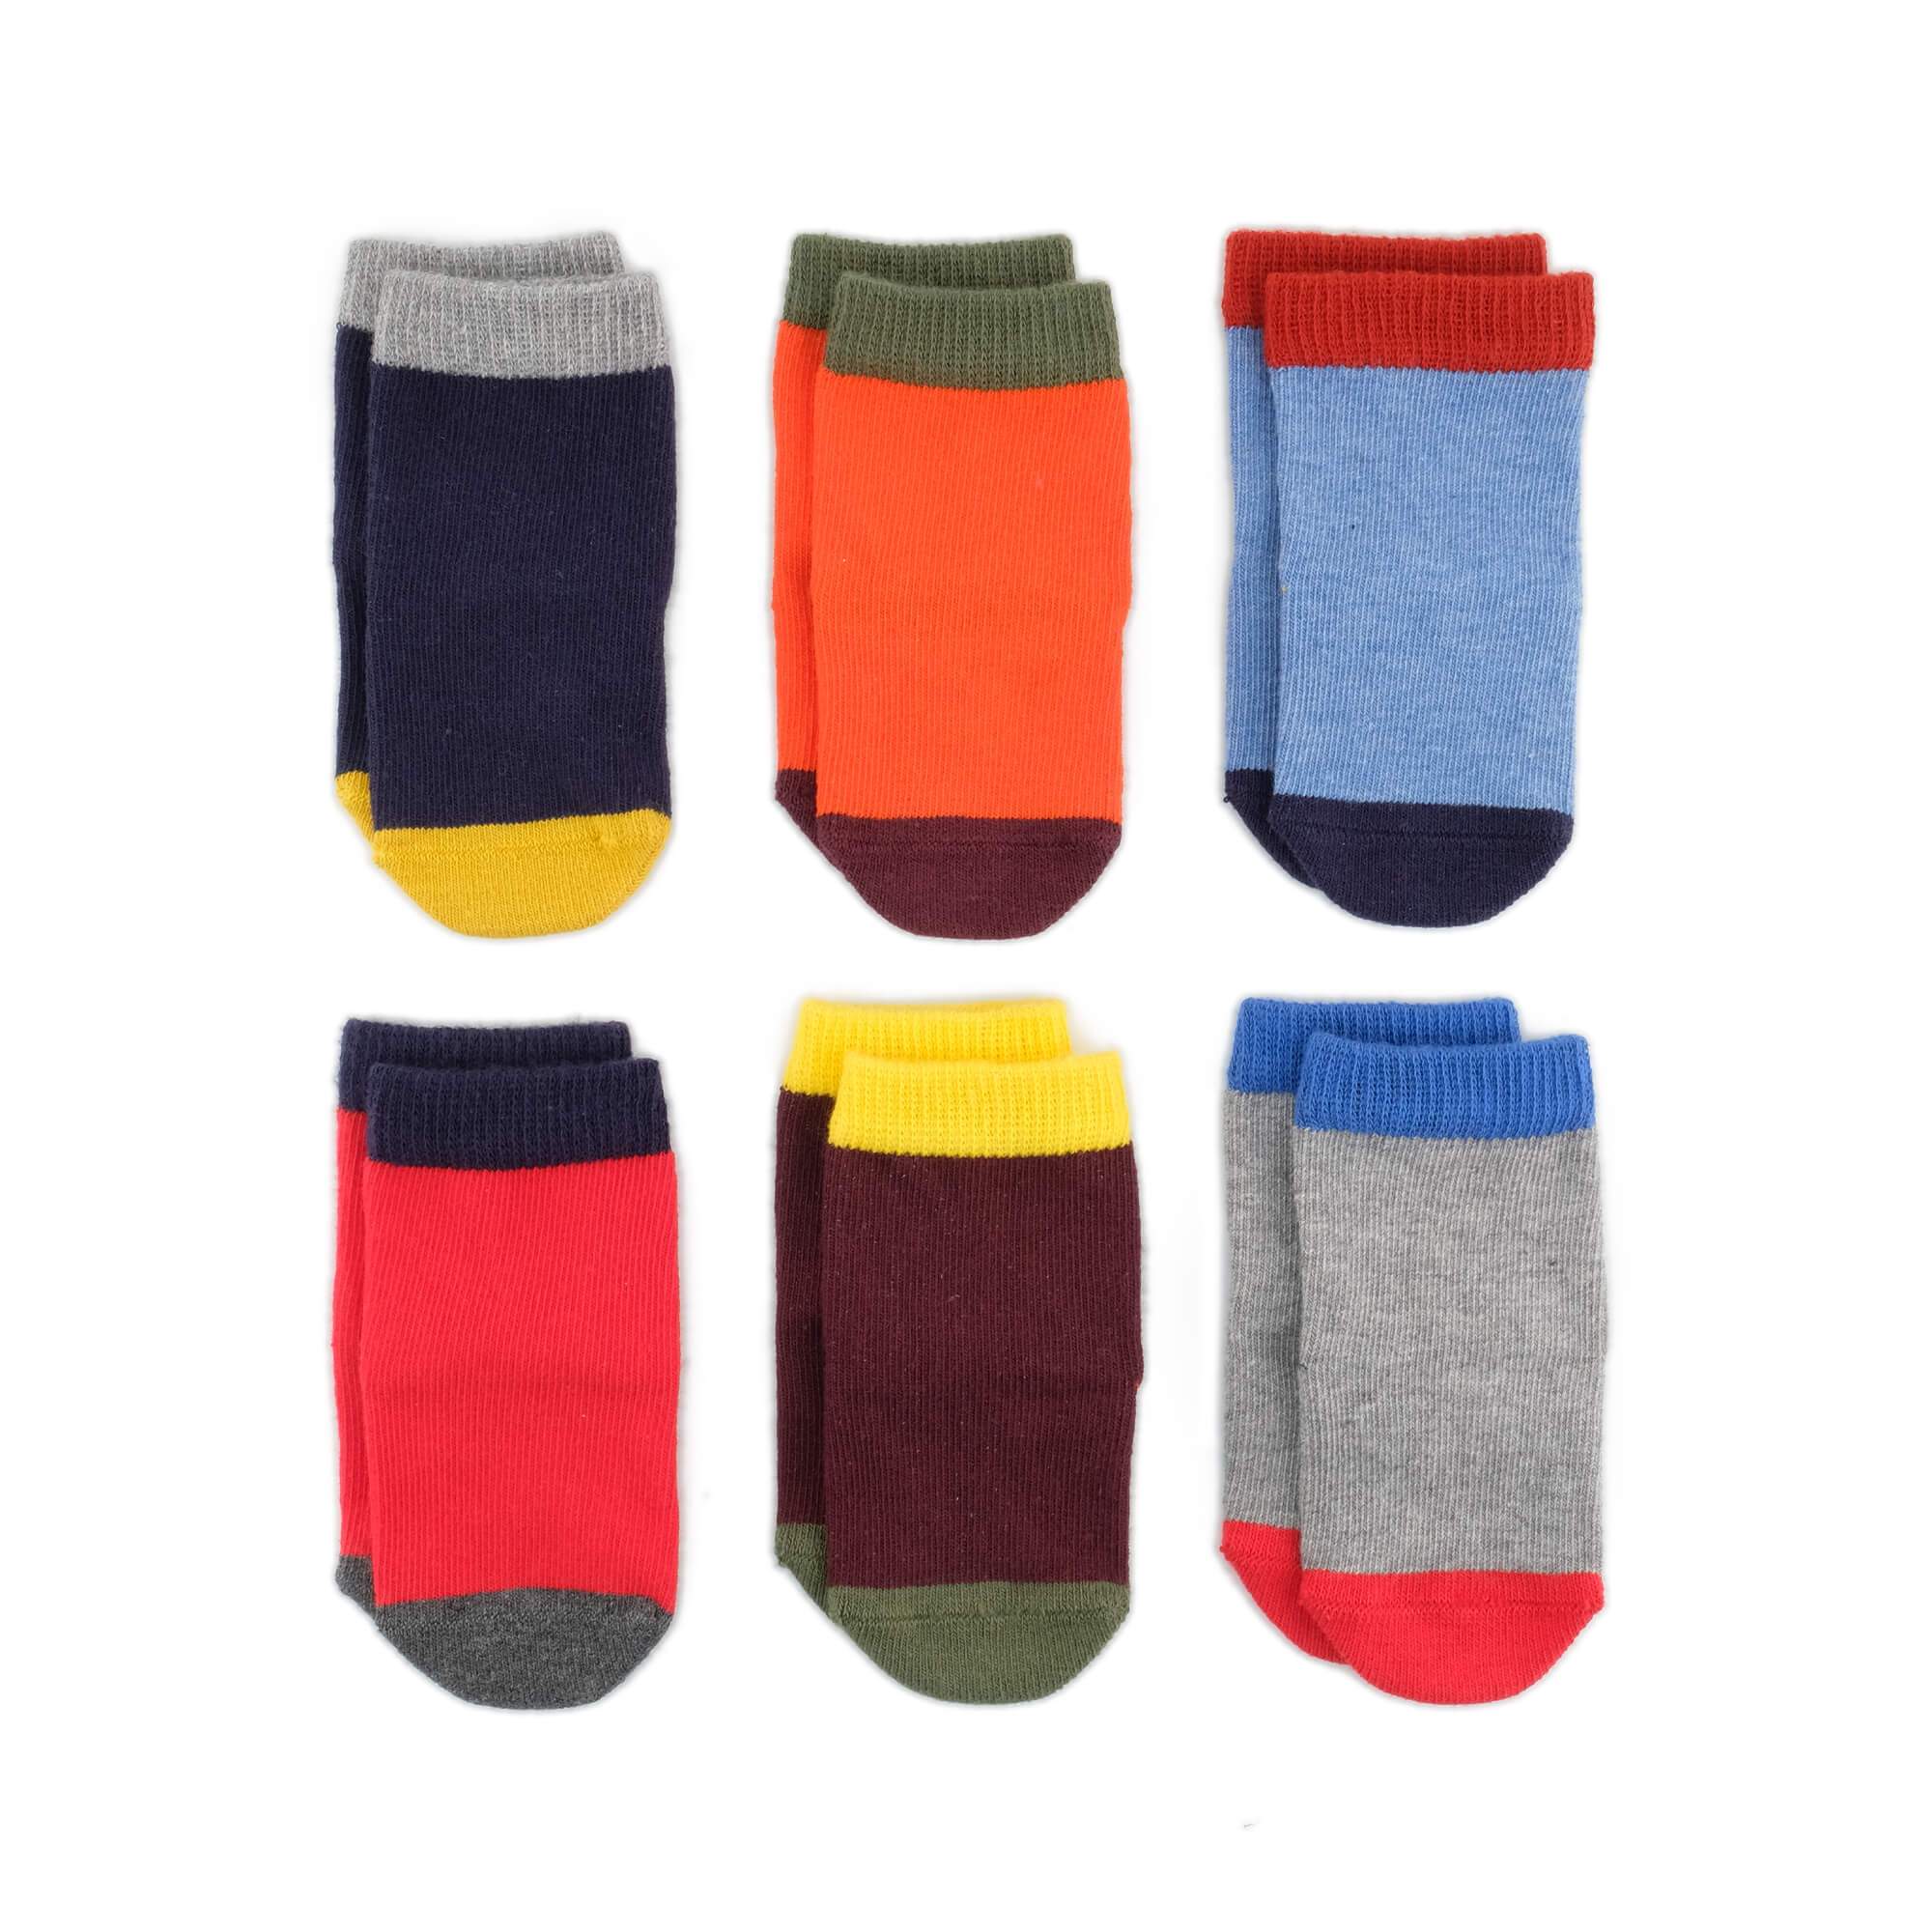 Baby Socks - Solid As A Rock Baby Socks Gift Box - Color Block Baby Socks - product front view⎪Lil'Etiquette Clothiers